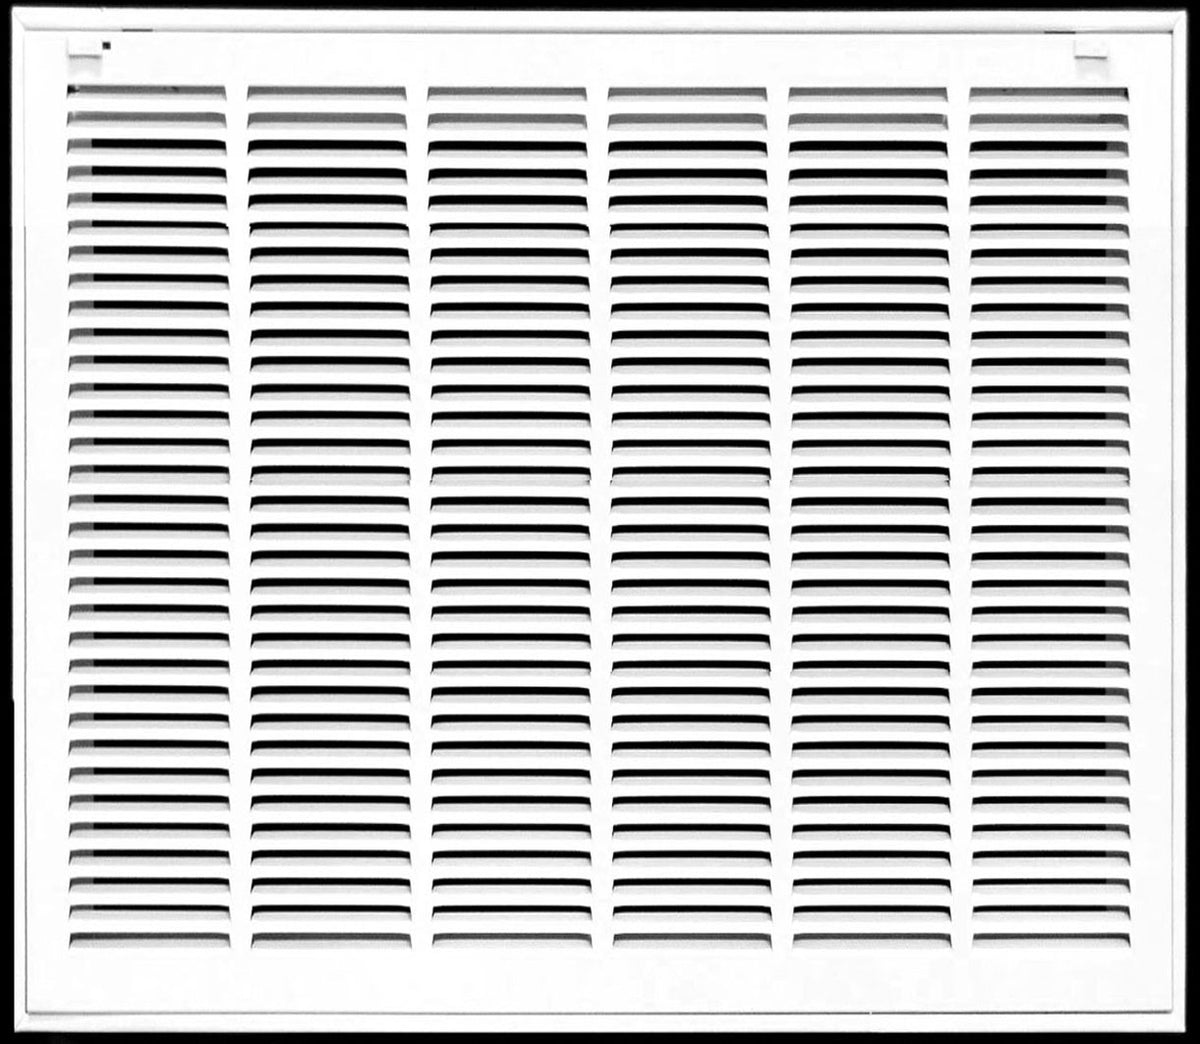 32&quot; X 32&quot; Steel Return Air Filter Grille for 1&quot; Filter - Removable Frame - [Outer Dimensions: 34 5/8&quot; X 34 5/8&quot;]